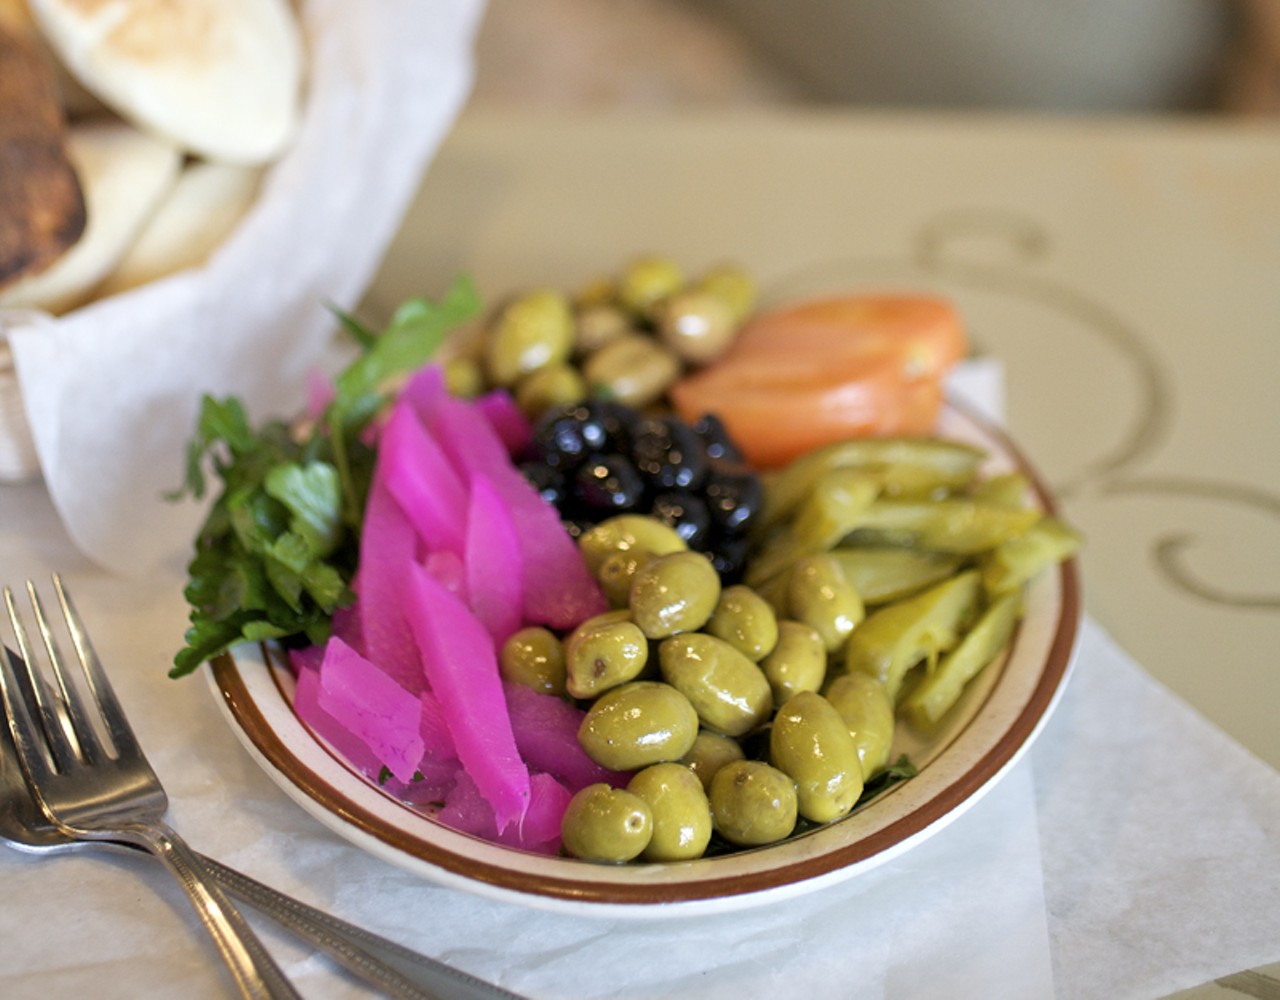 The pickle plate comes with the combo appetizer. The bright pink vegetable is a pickled turnip. The plate also comes with green olives pickled with lemon, calamata olives in olive oil, pickled Persian cucumbers, tomato and flat leaf parsley.